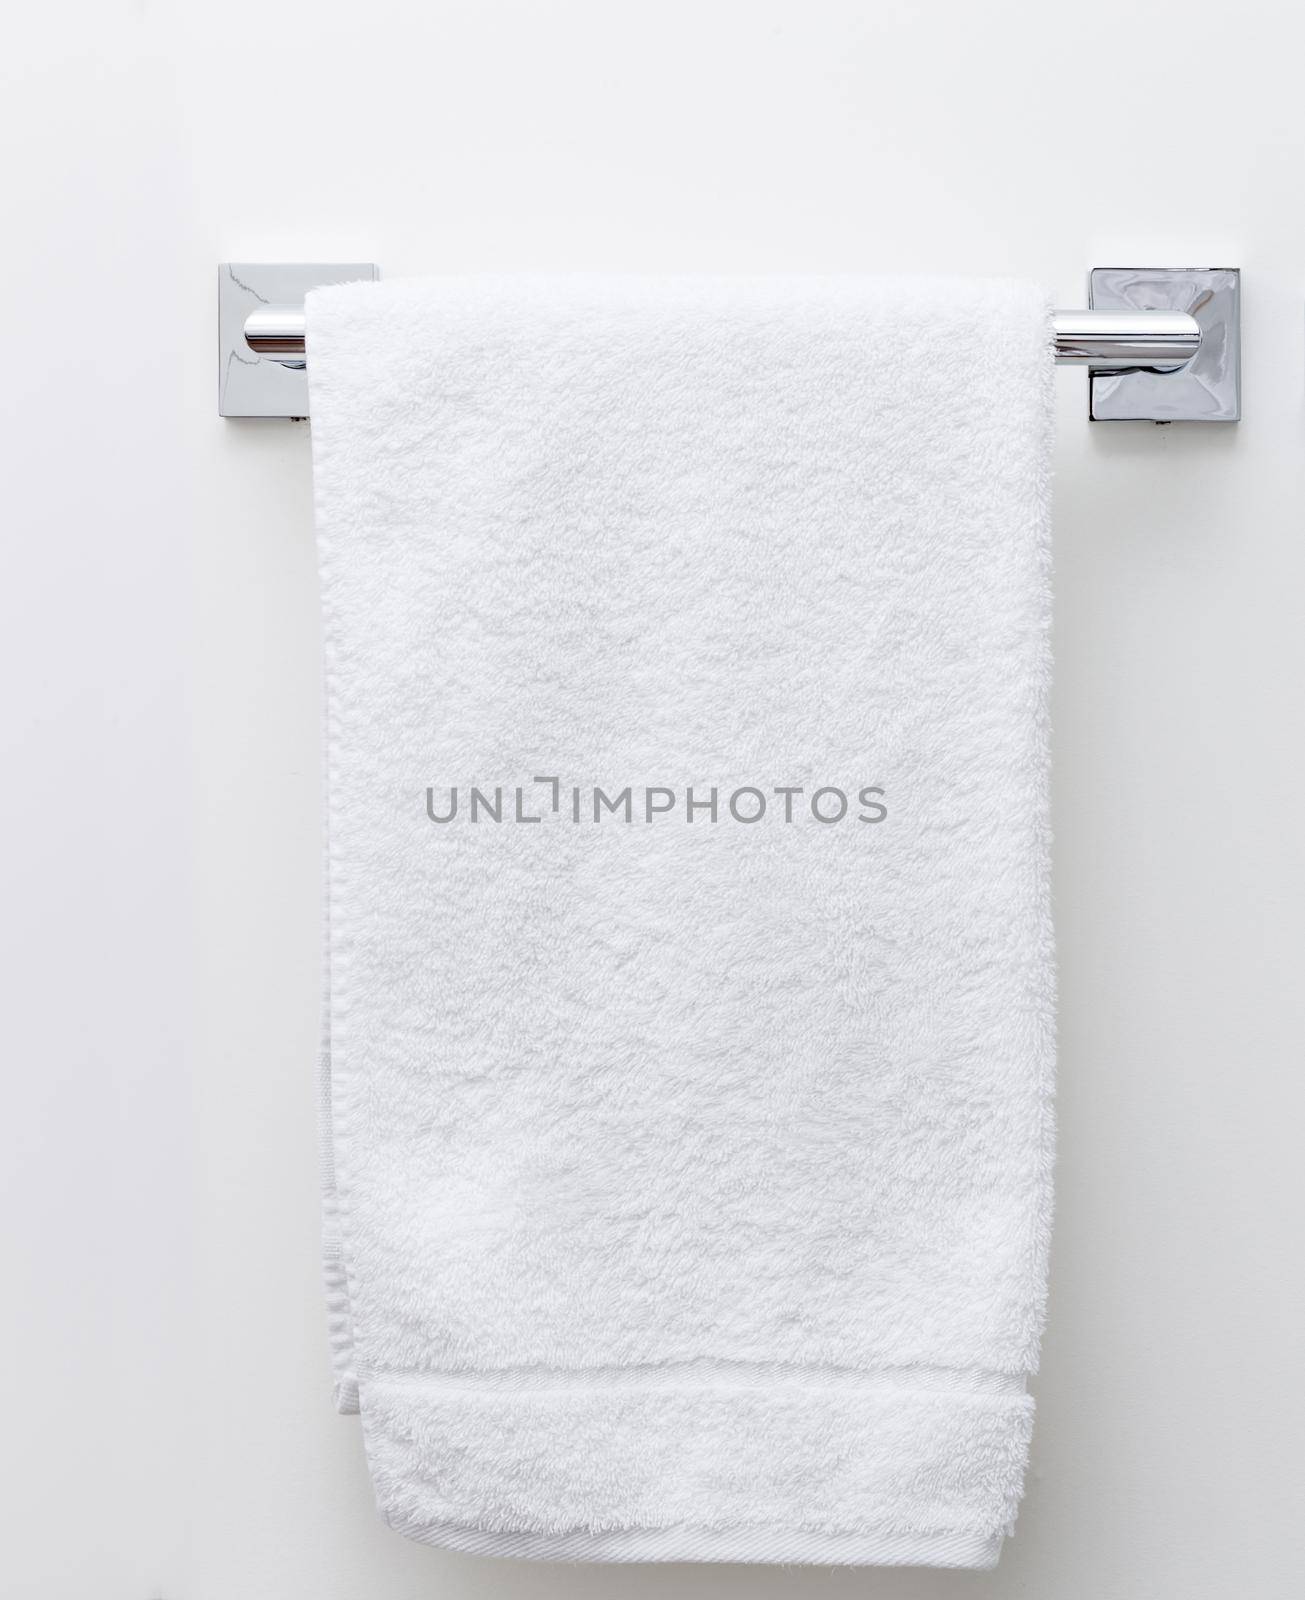 Modern bathroom towel dryer on white wall background by Mariakray